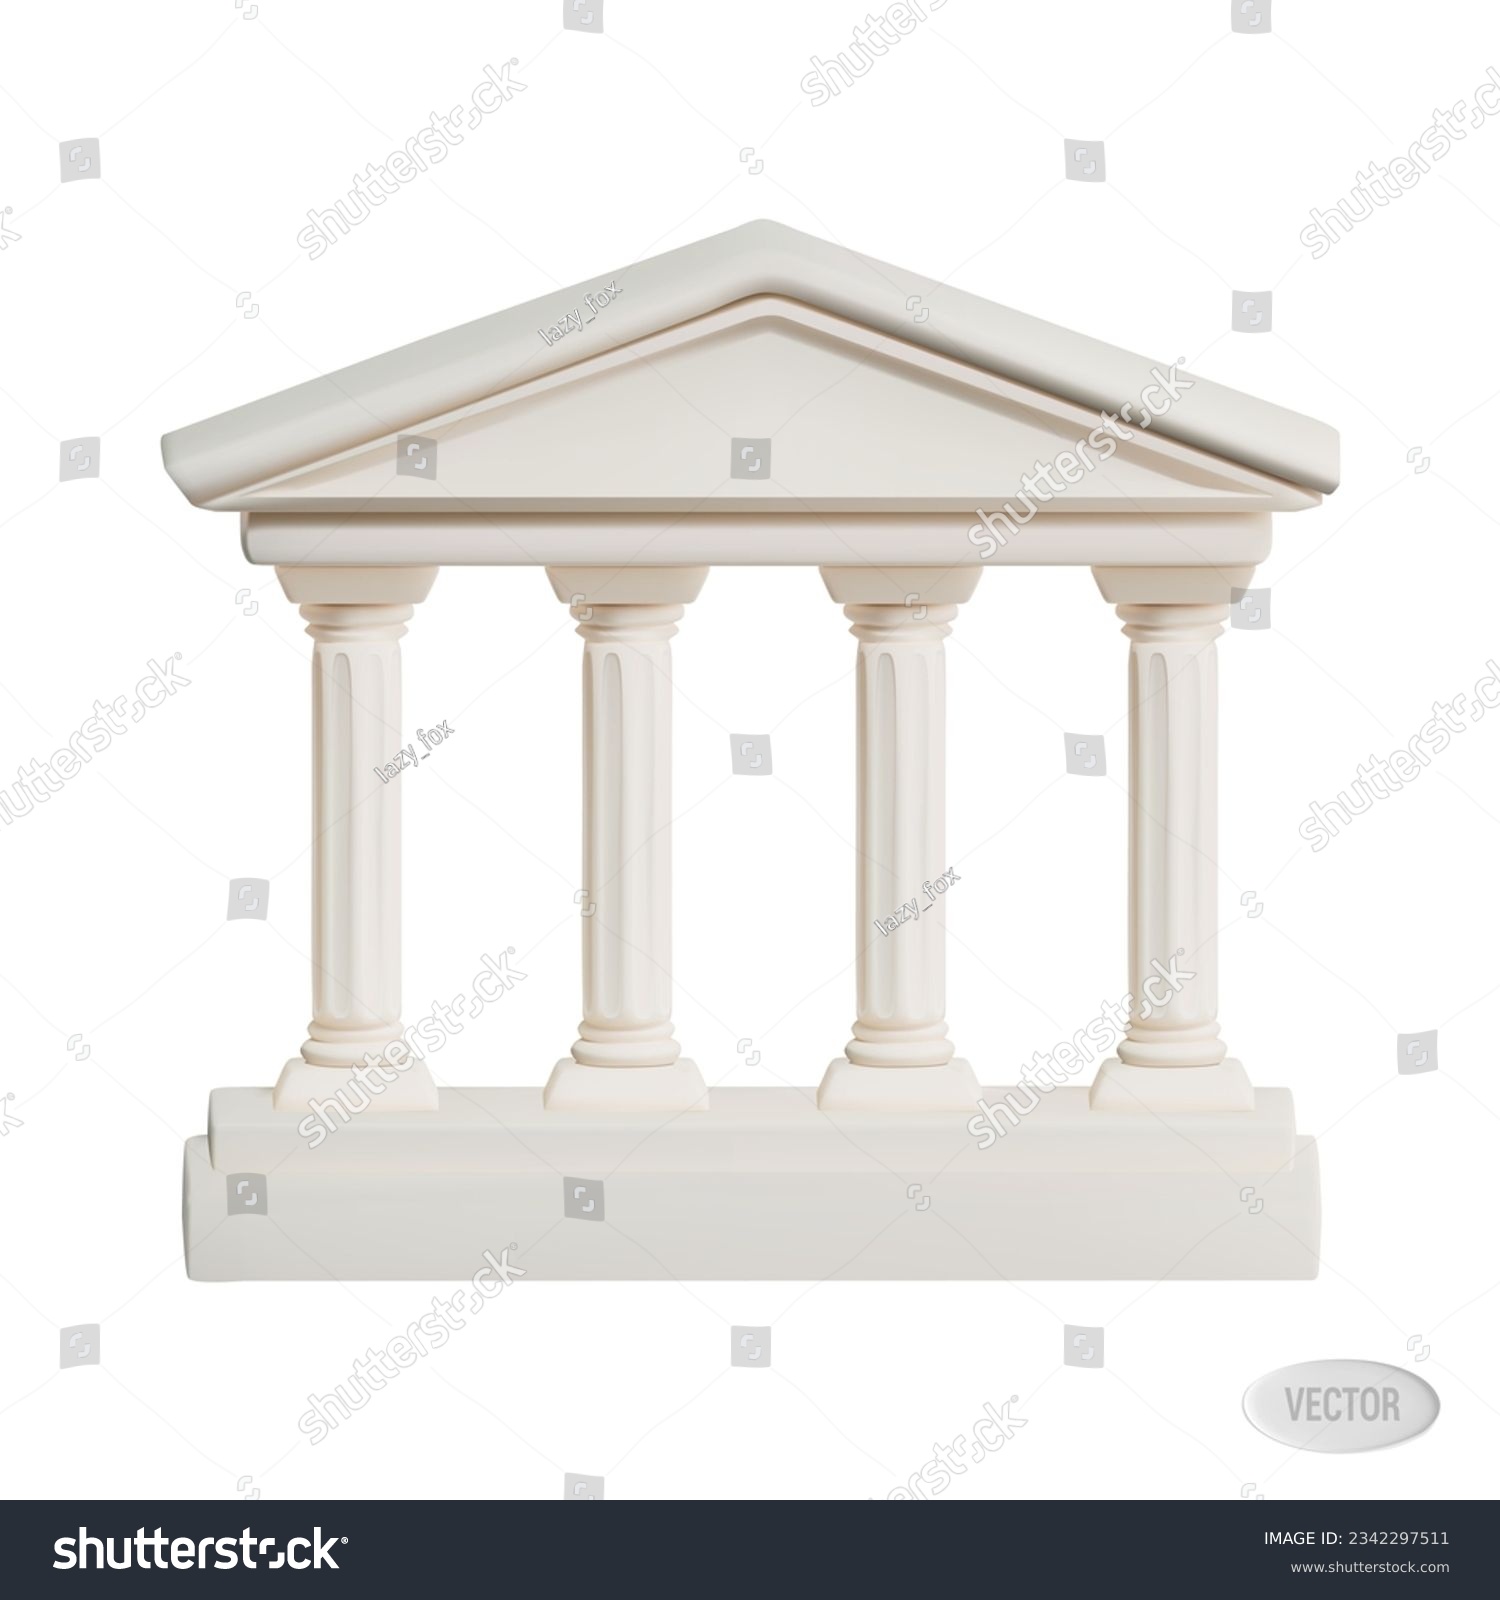 SVG of Render of antique columns icon in Greek style. For banking and finance. Vector 3D illustration isolated on white background svg